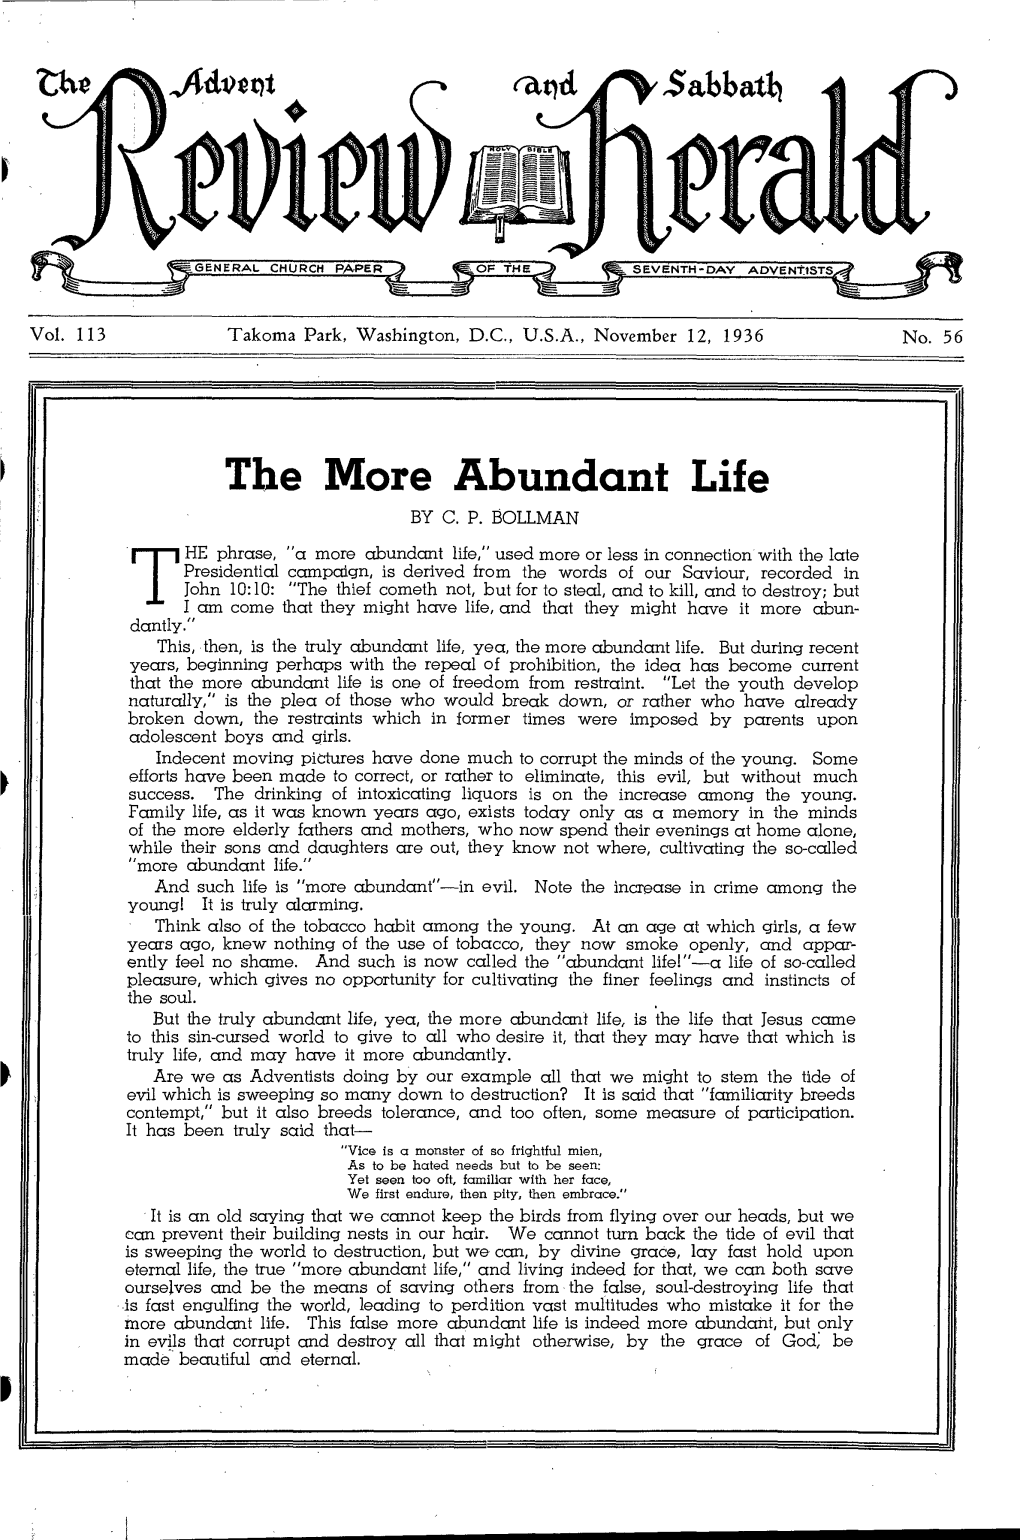 The More Abundant Life by C